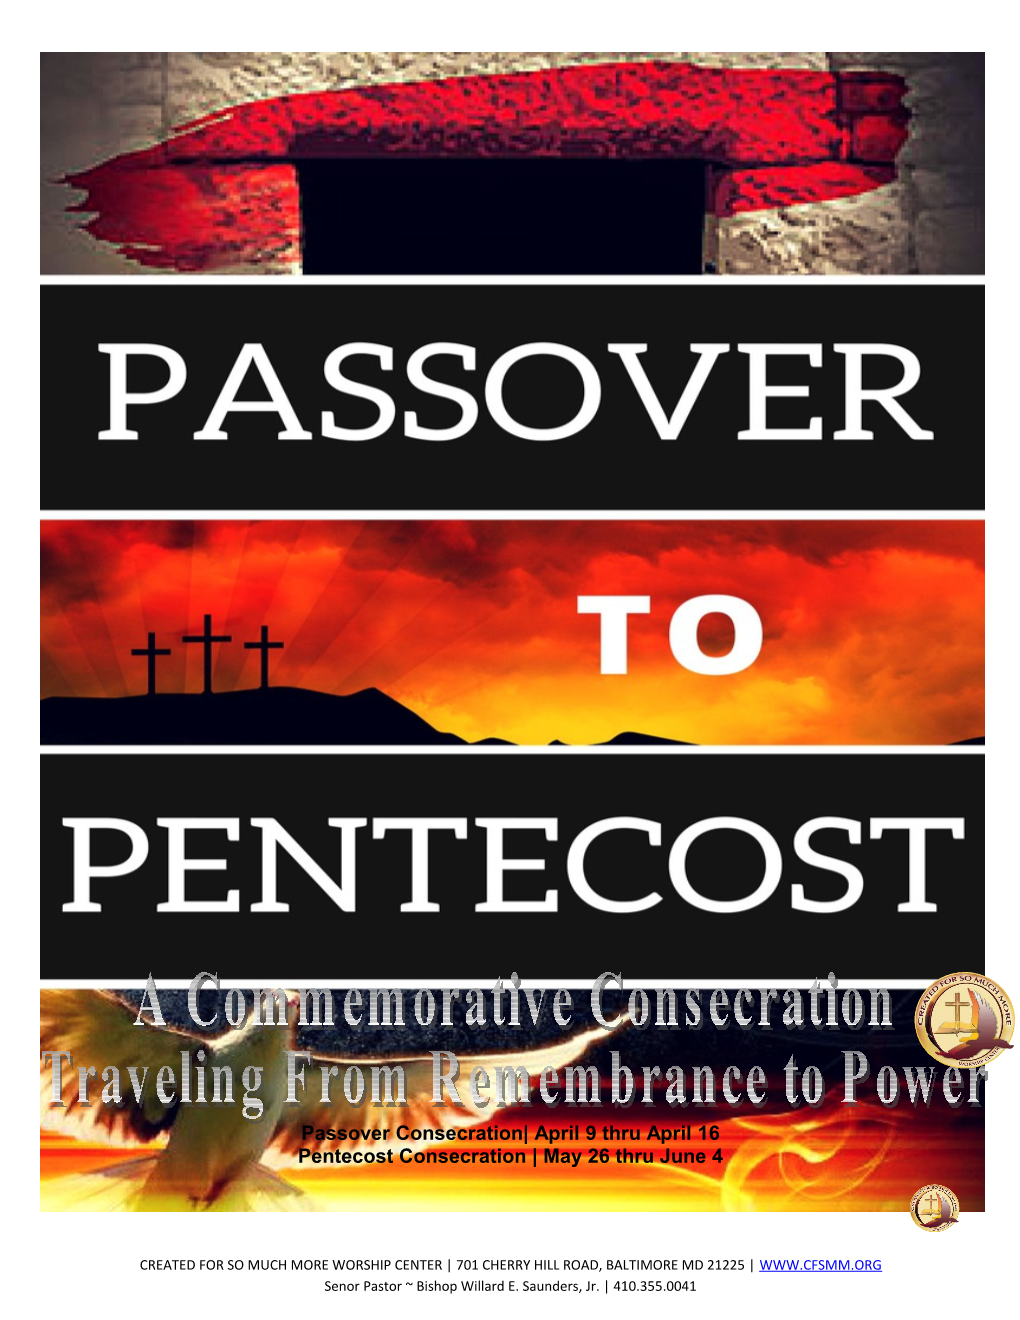 Passover to Pentecost a Commemorative Consecration Traveling from Remembrance to Power 2017